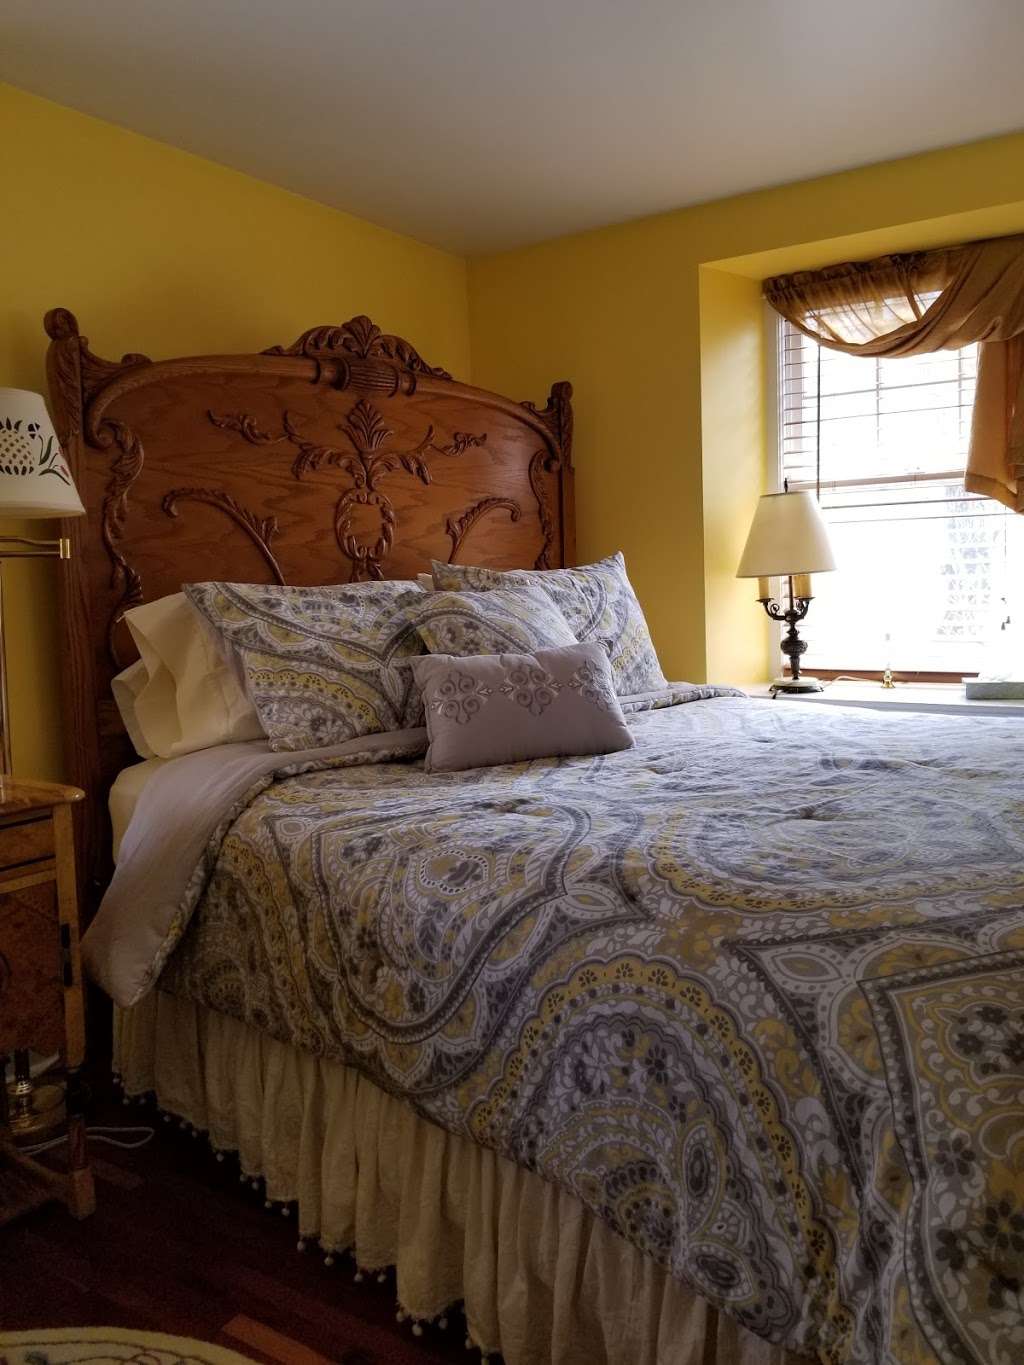 Living Spring Farm Bed & Breakfast | 1737 Alleghenyville Rd, Mohnton, PA 19540 | Phone: (484) 529-0042